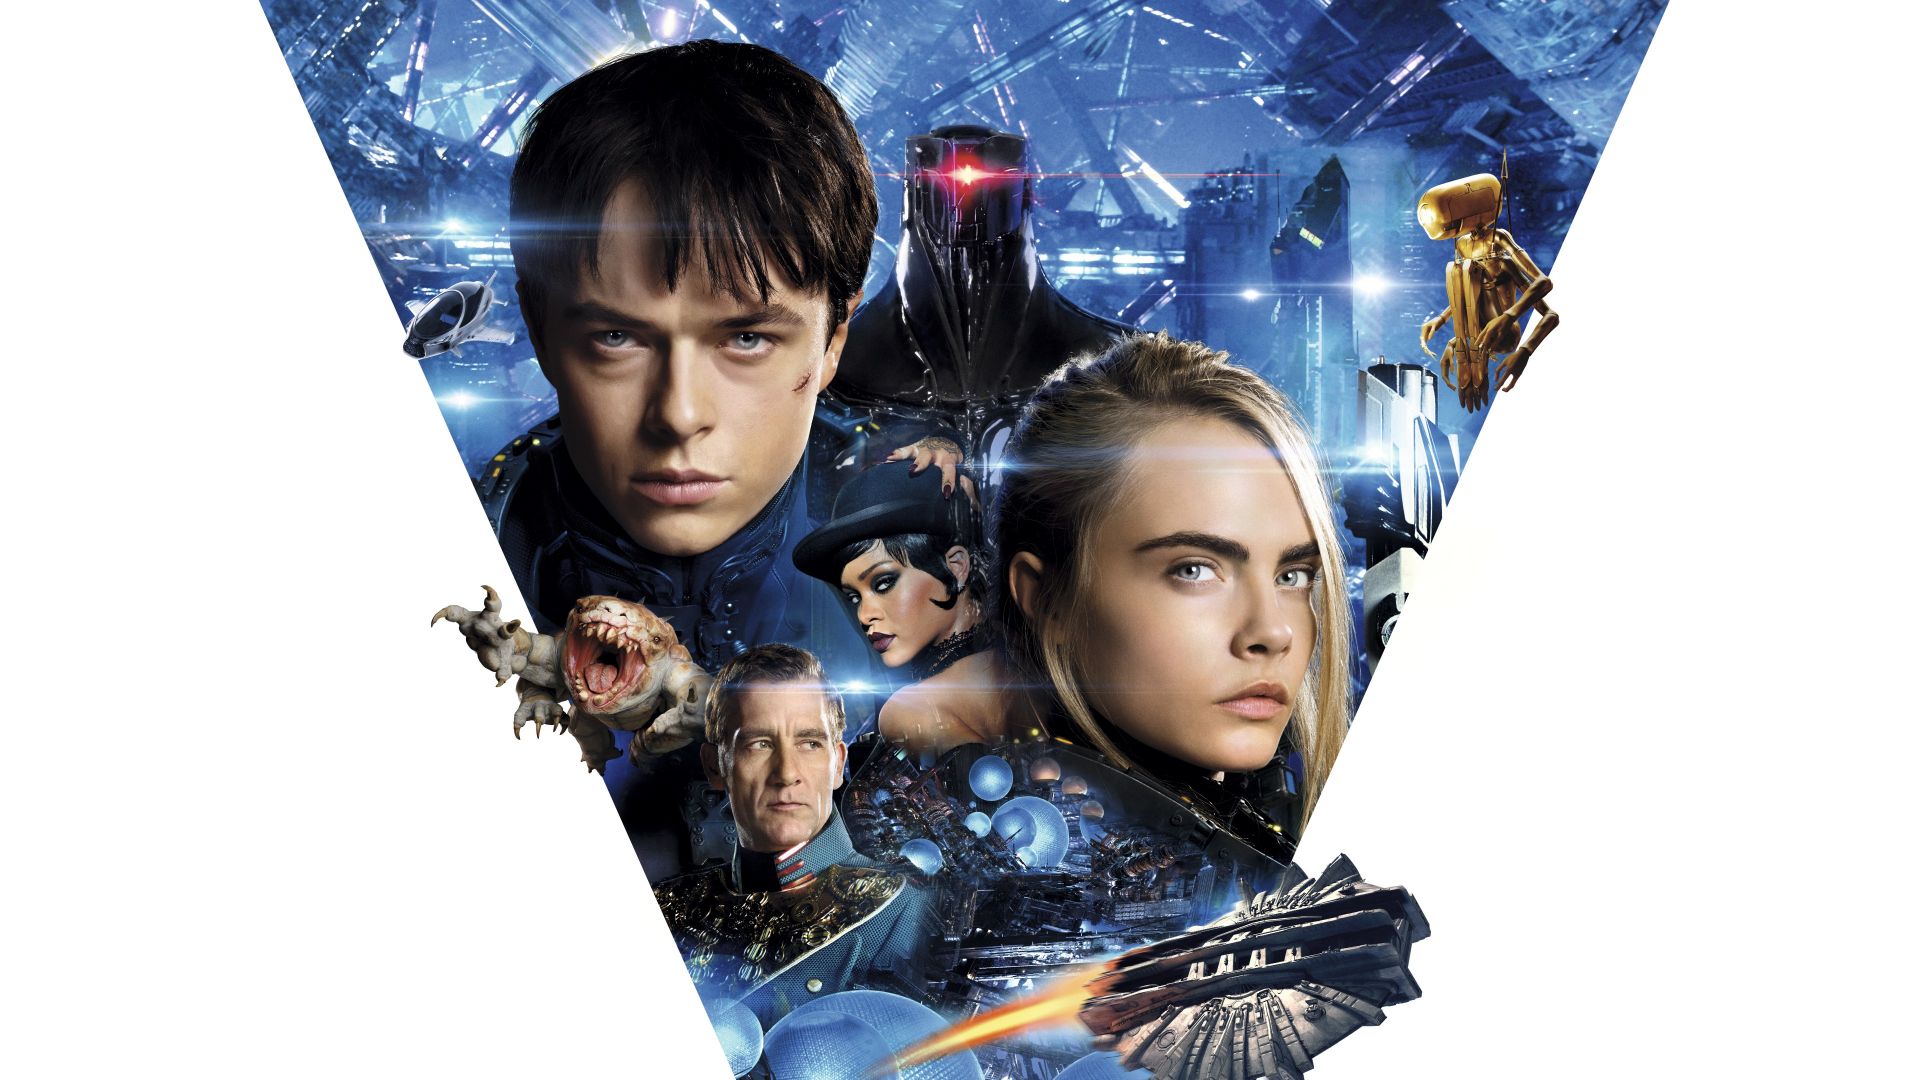 Valerian and the City of a Thousand Planets, 4k, Cara Delevingne, Dane DeHaan (horizontal)